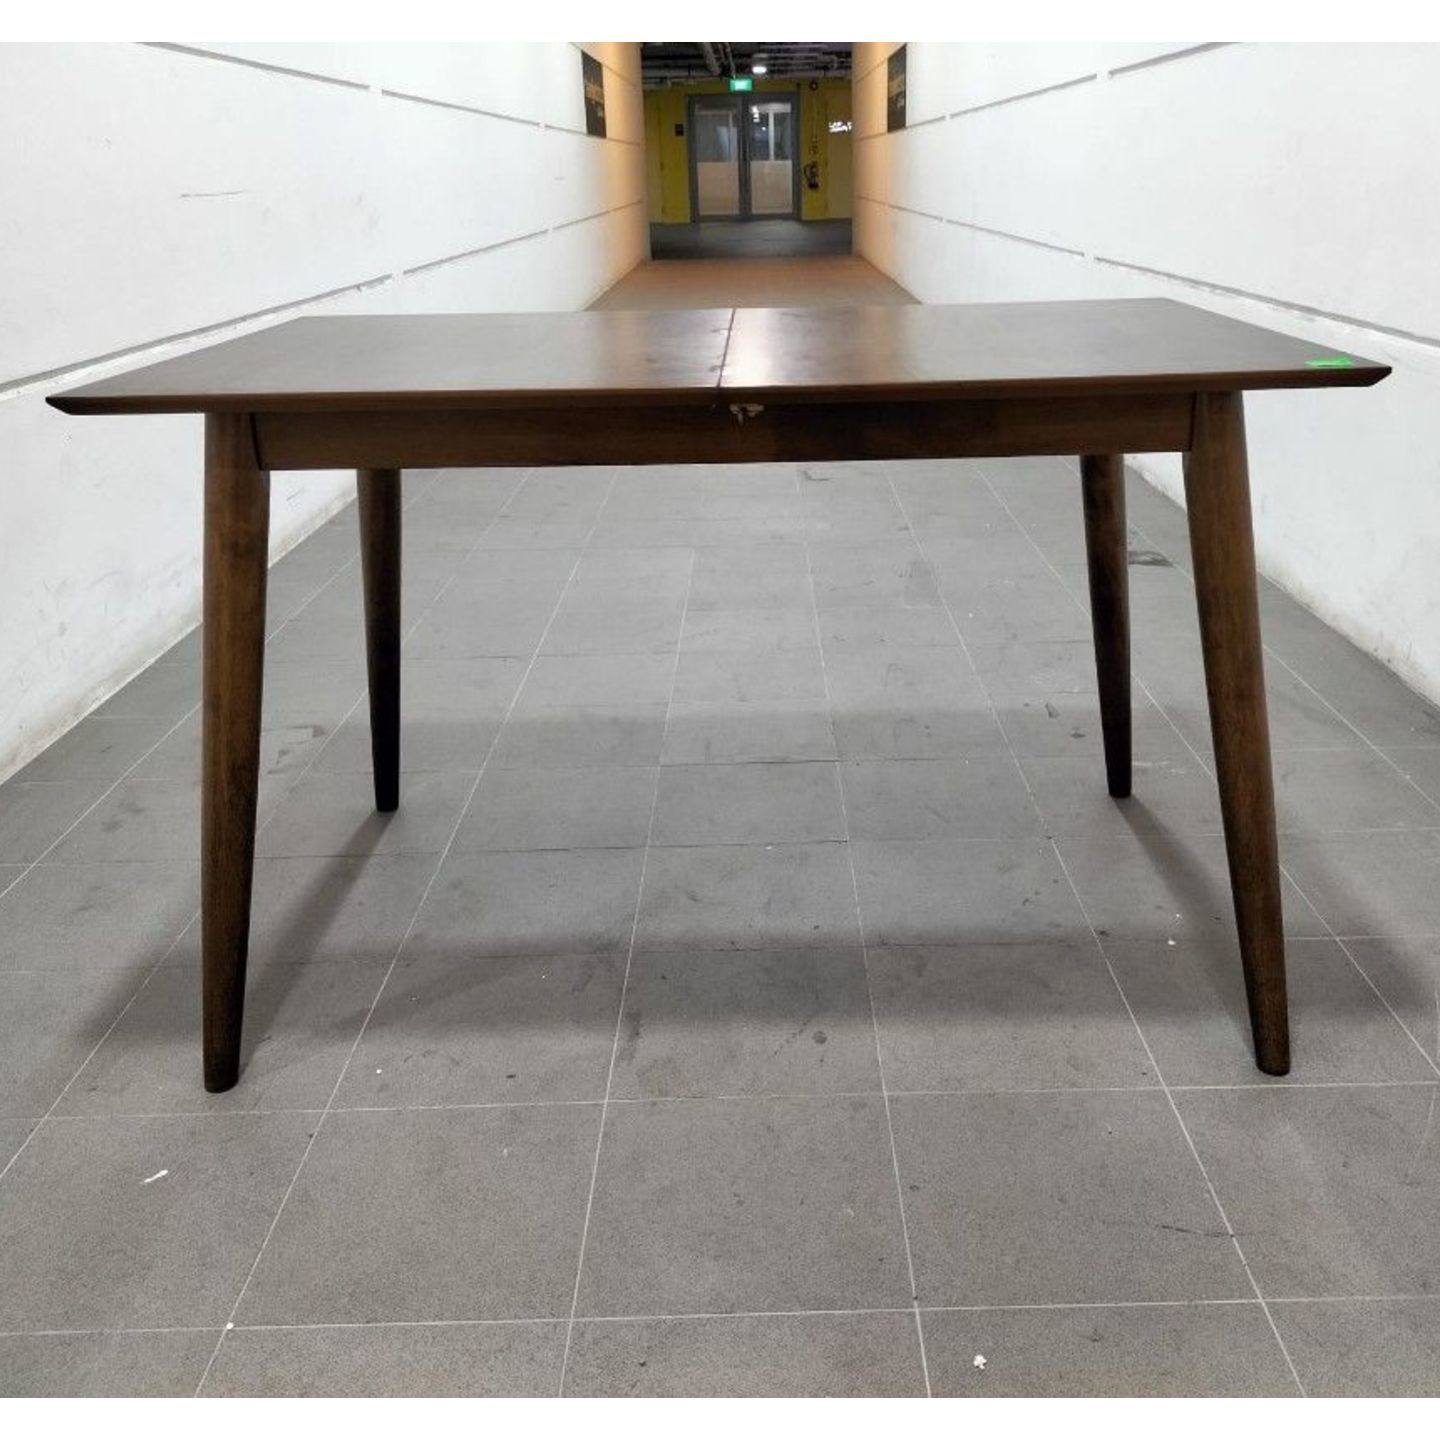 MARION Extendable Dining Table in WALNUT